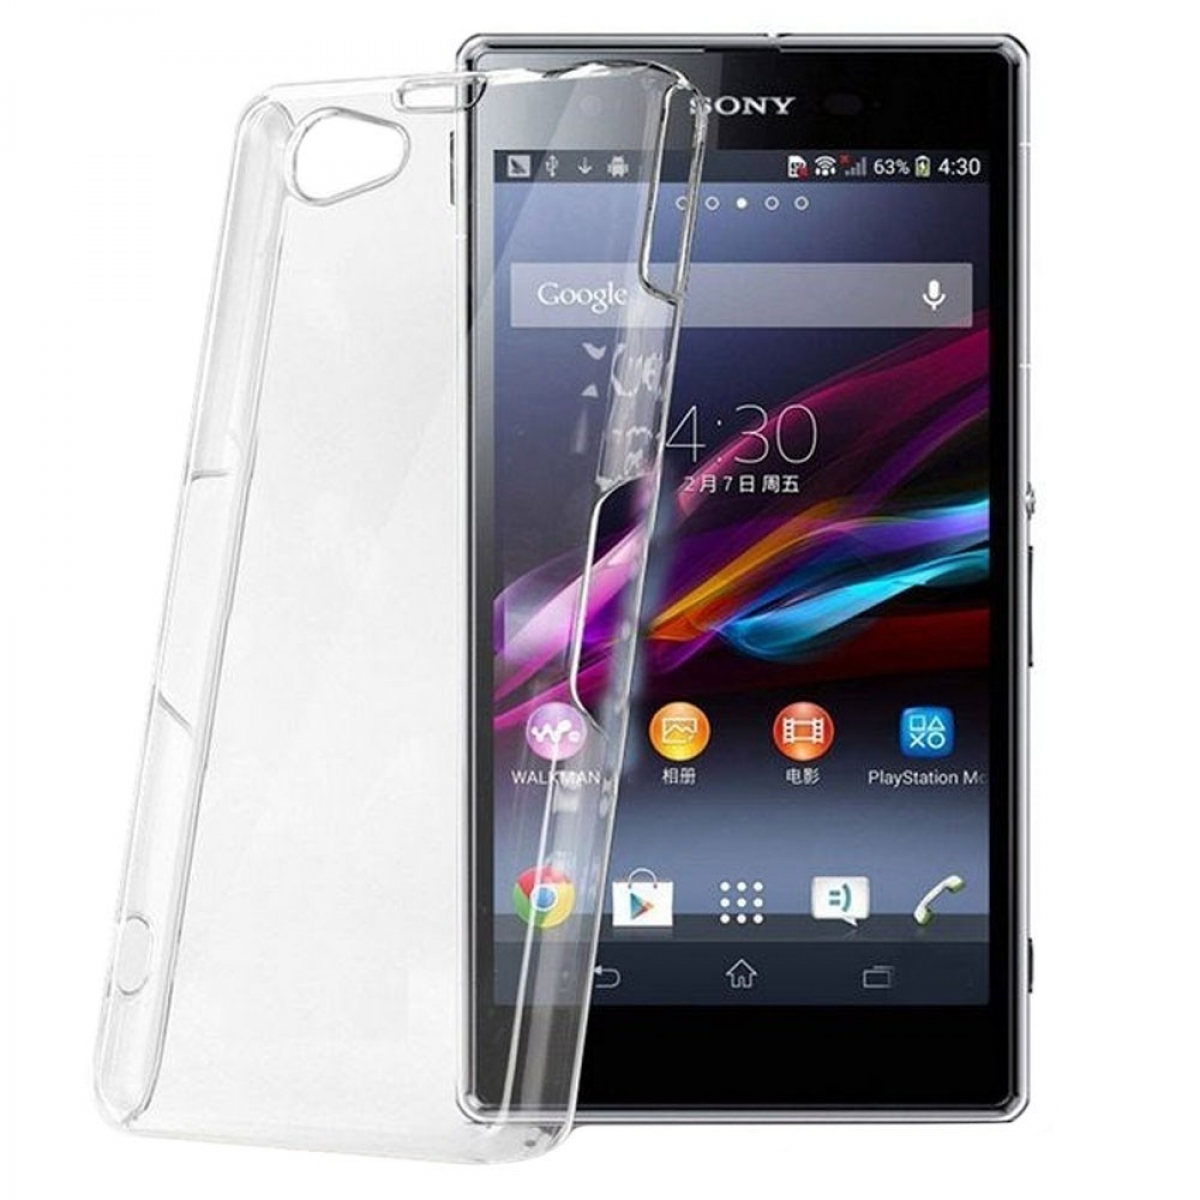 Z2 Backcover, Xperia Compact, Transparent CASEONLINE Sony, CA4,